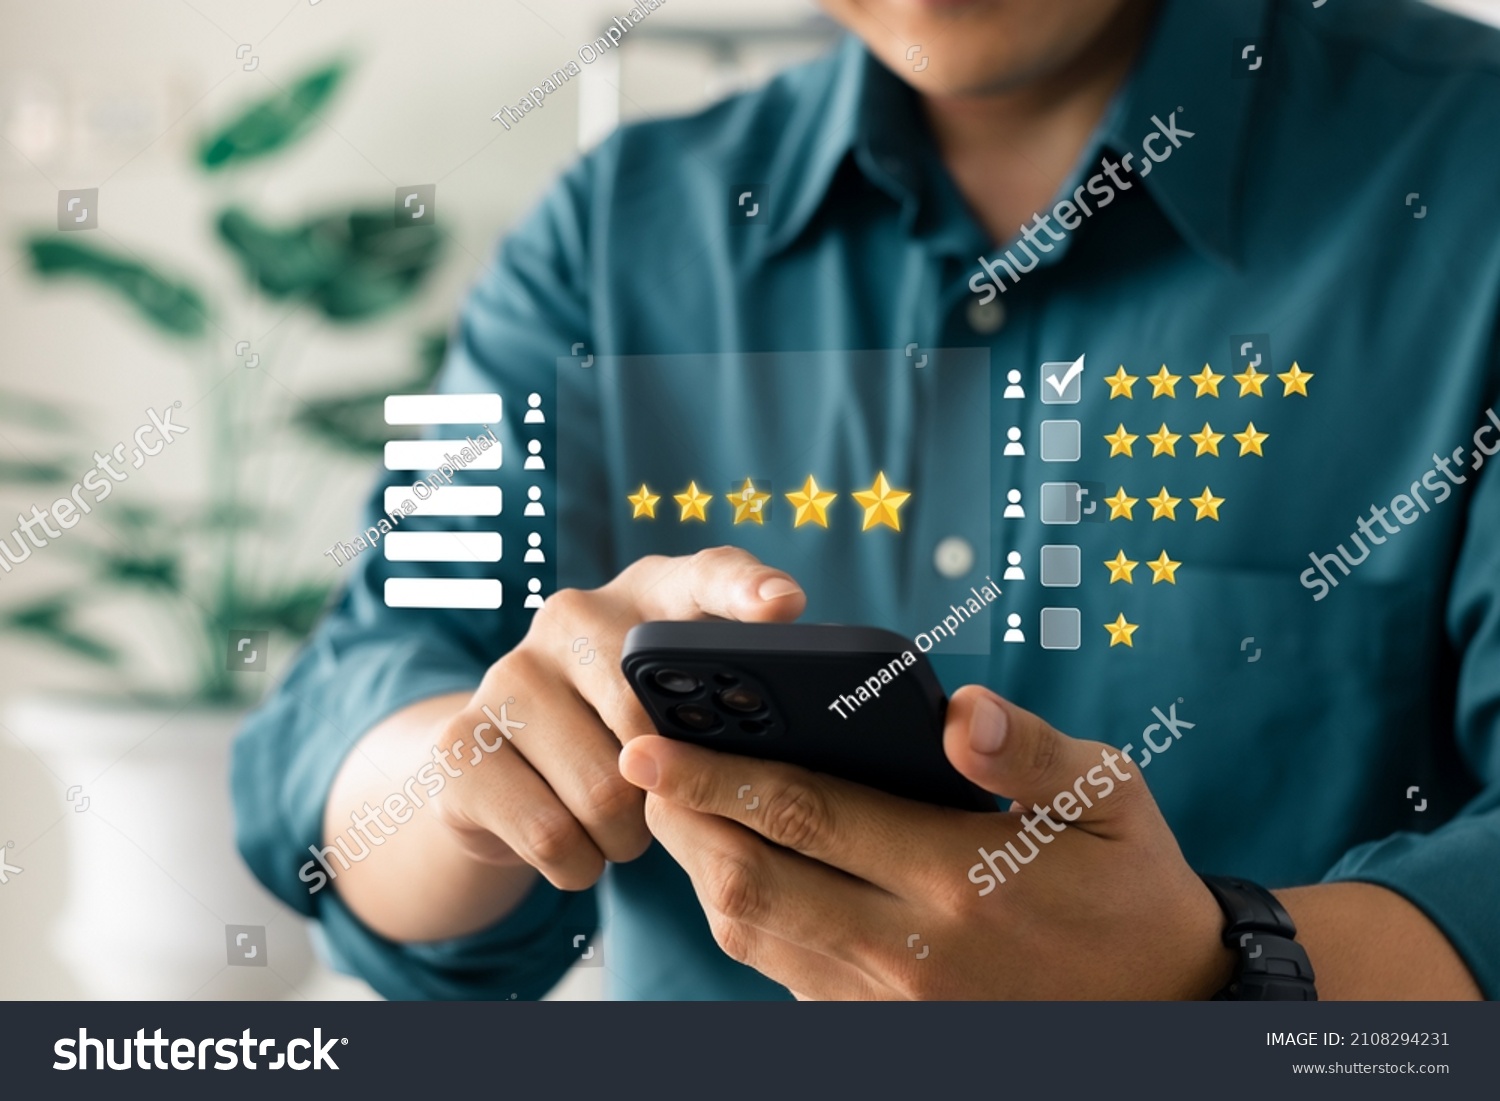 User give rating to service experience on online application, Customer review satisfaction feedback survey concept, Customer can evaluate quality of service leading to reputation ranking of business. #2108294231